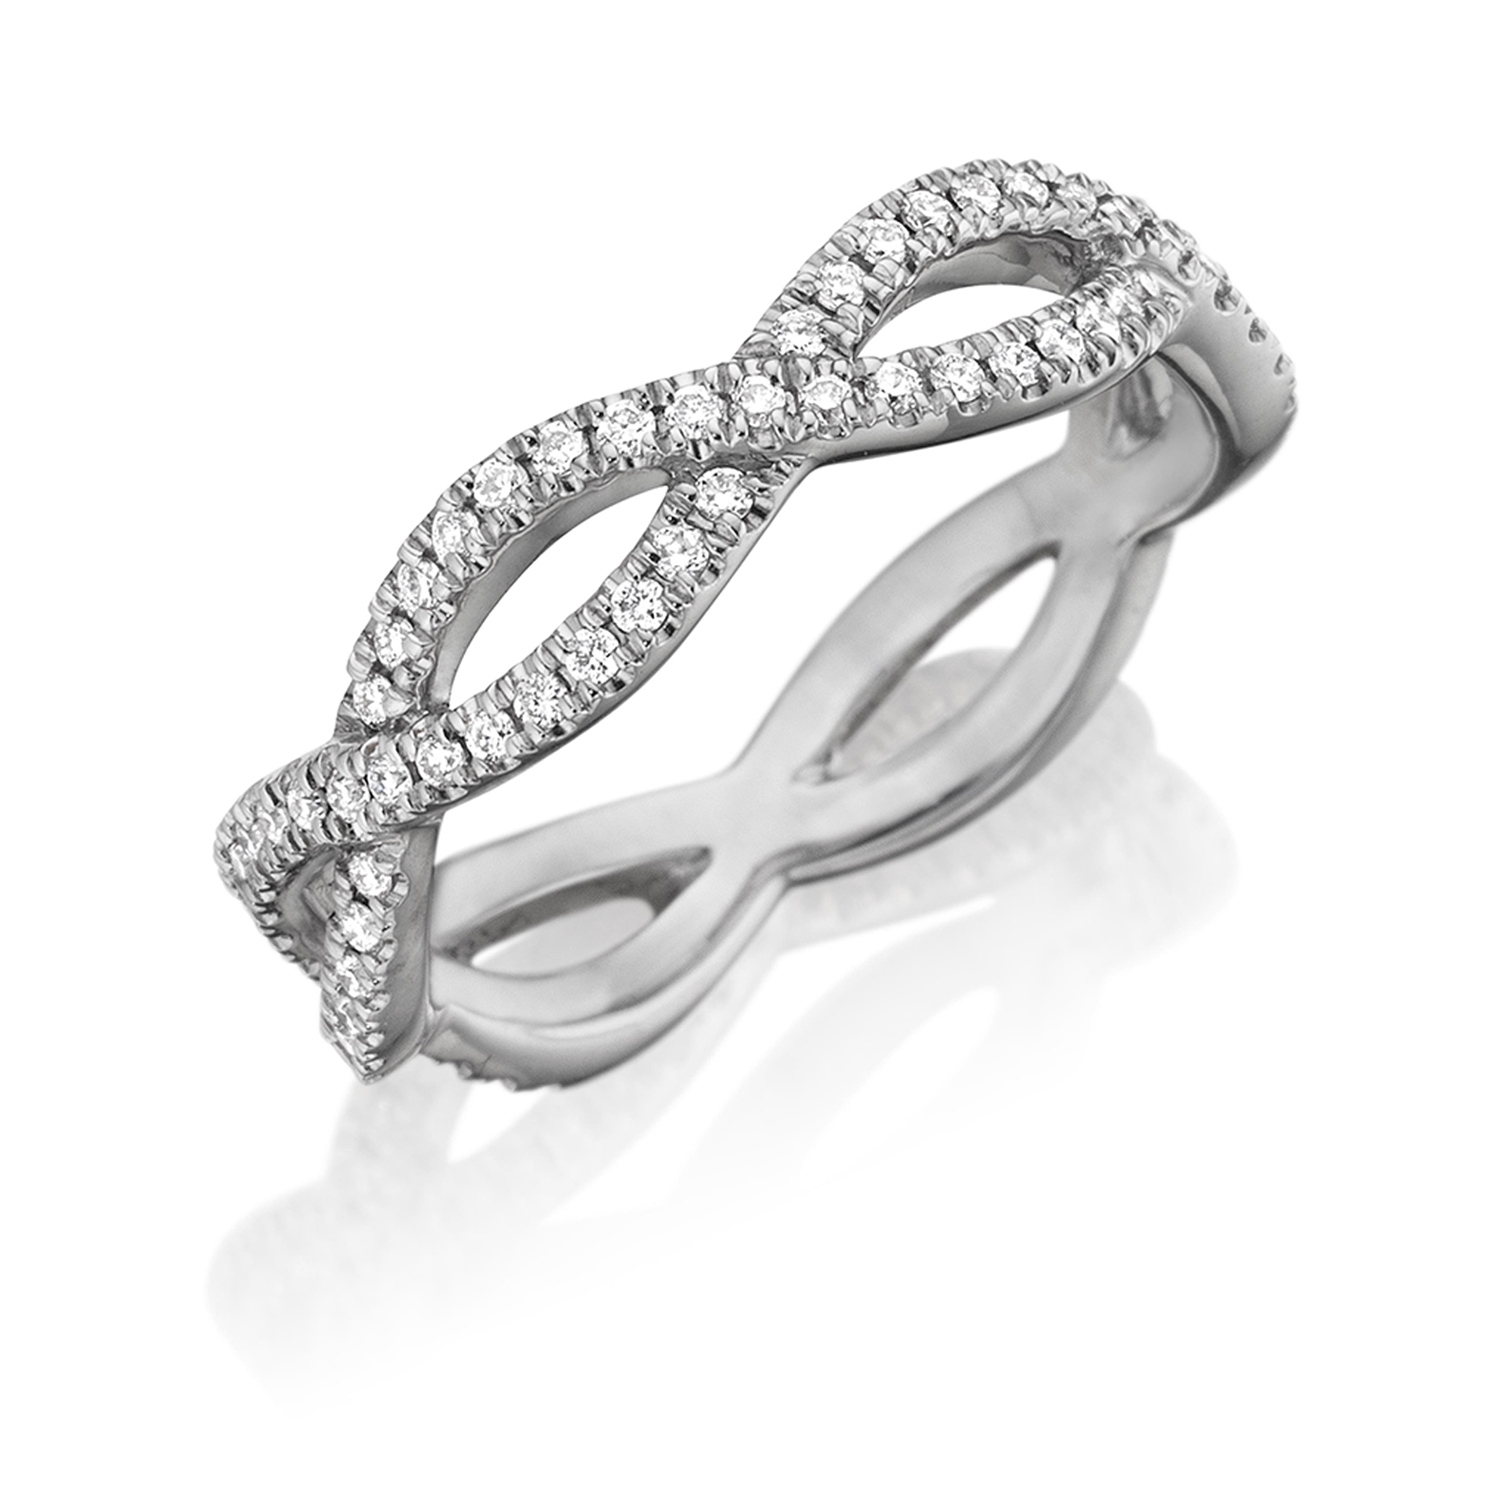 Henri Daussi R23-1 Twisted Band with Pave Set Diamonds